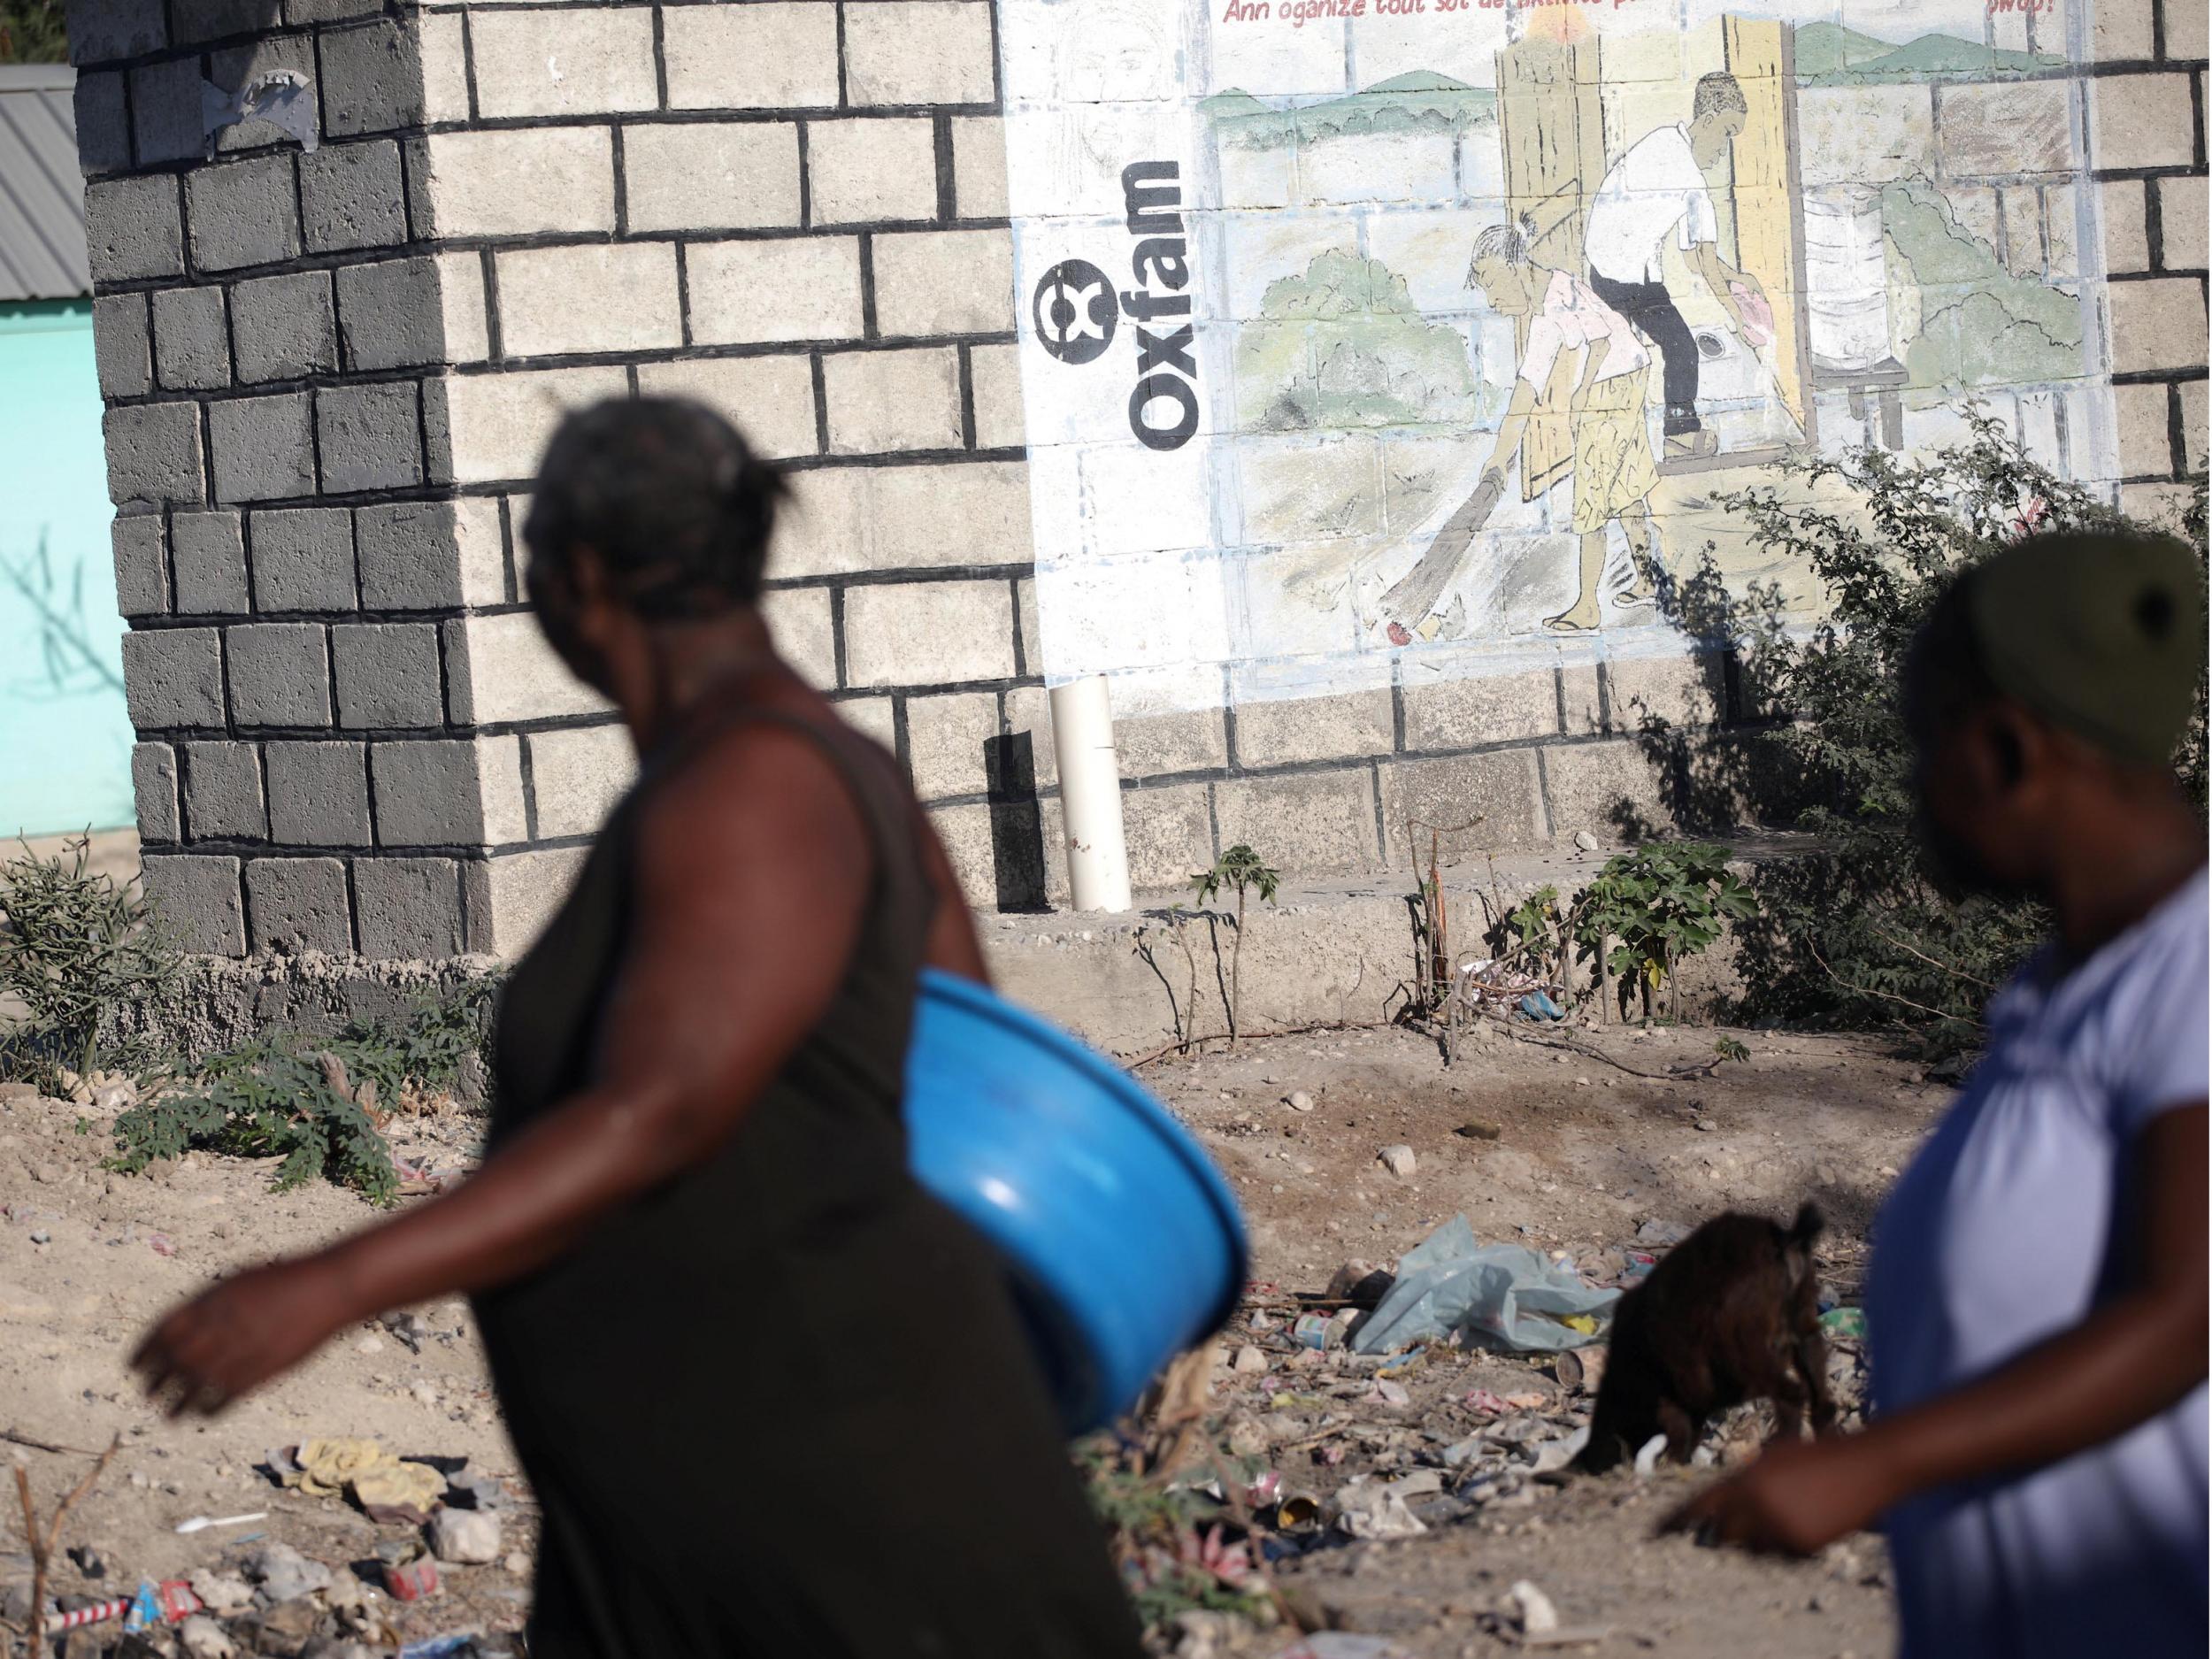 People walk past an Oxfam sign in Corail, a camp for people displaced after 2010 earthquake, on the outskirts of Port-au-Prince, Haiti